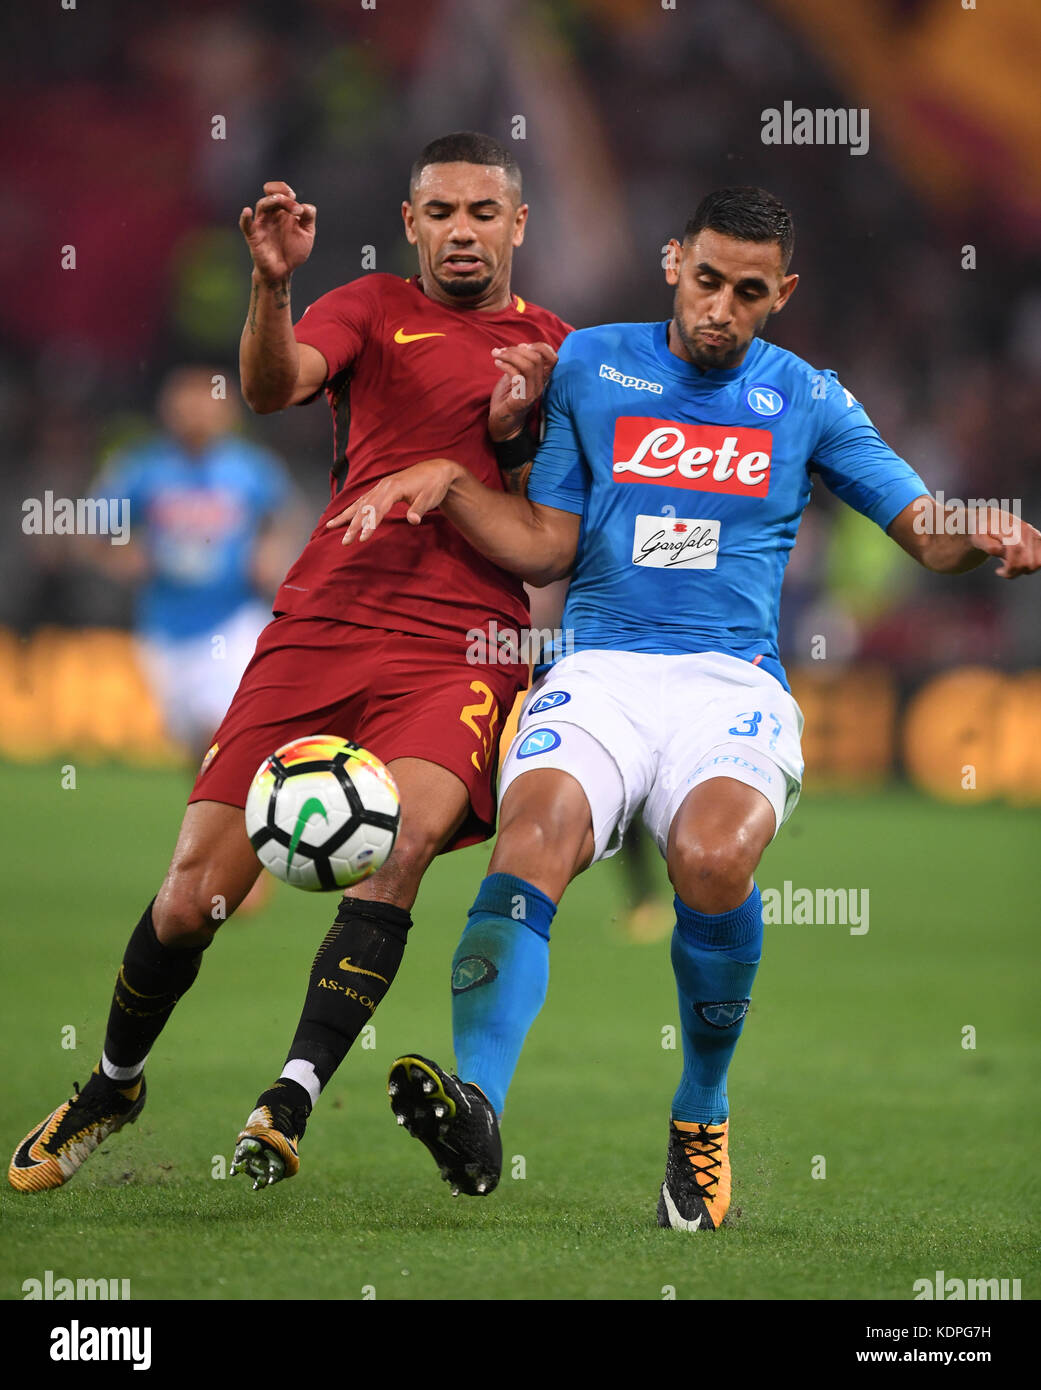 Roma, Italy. 14th Oct, 2017. Roma's Bruno Reres (L) vies with Napoli's Faouzi Ghoulam during a Serie A soccer match between Roma and Napoli in Rome, Italy, Oct. 14, 2017. Napoli won 1-0. Credit: Alberto Lingria/Xinhua/Alamy Live News Stock Photo